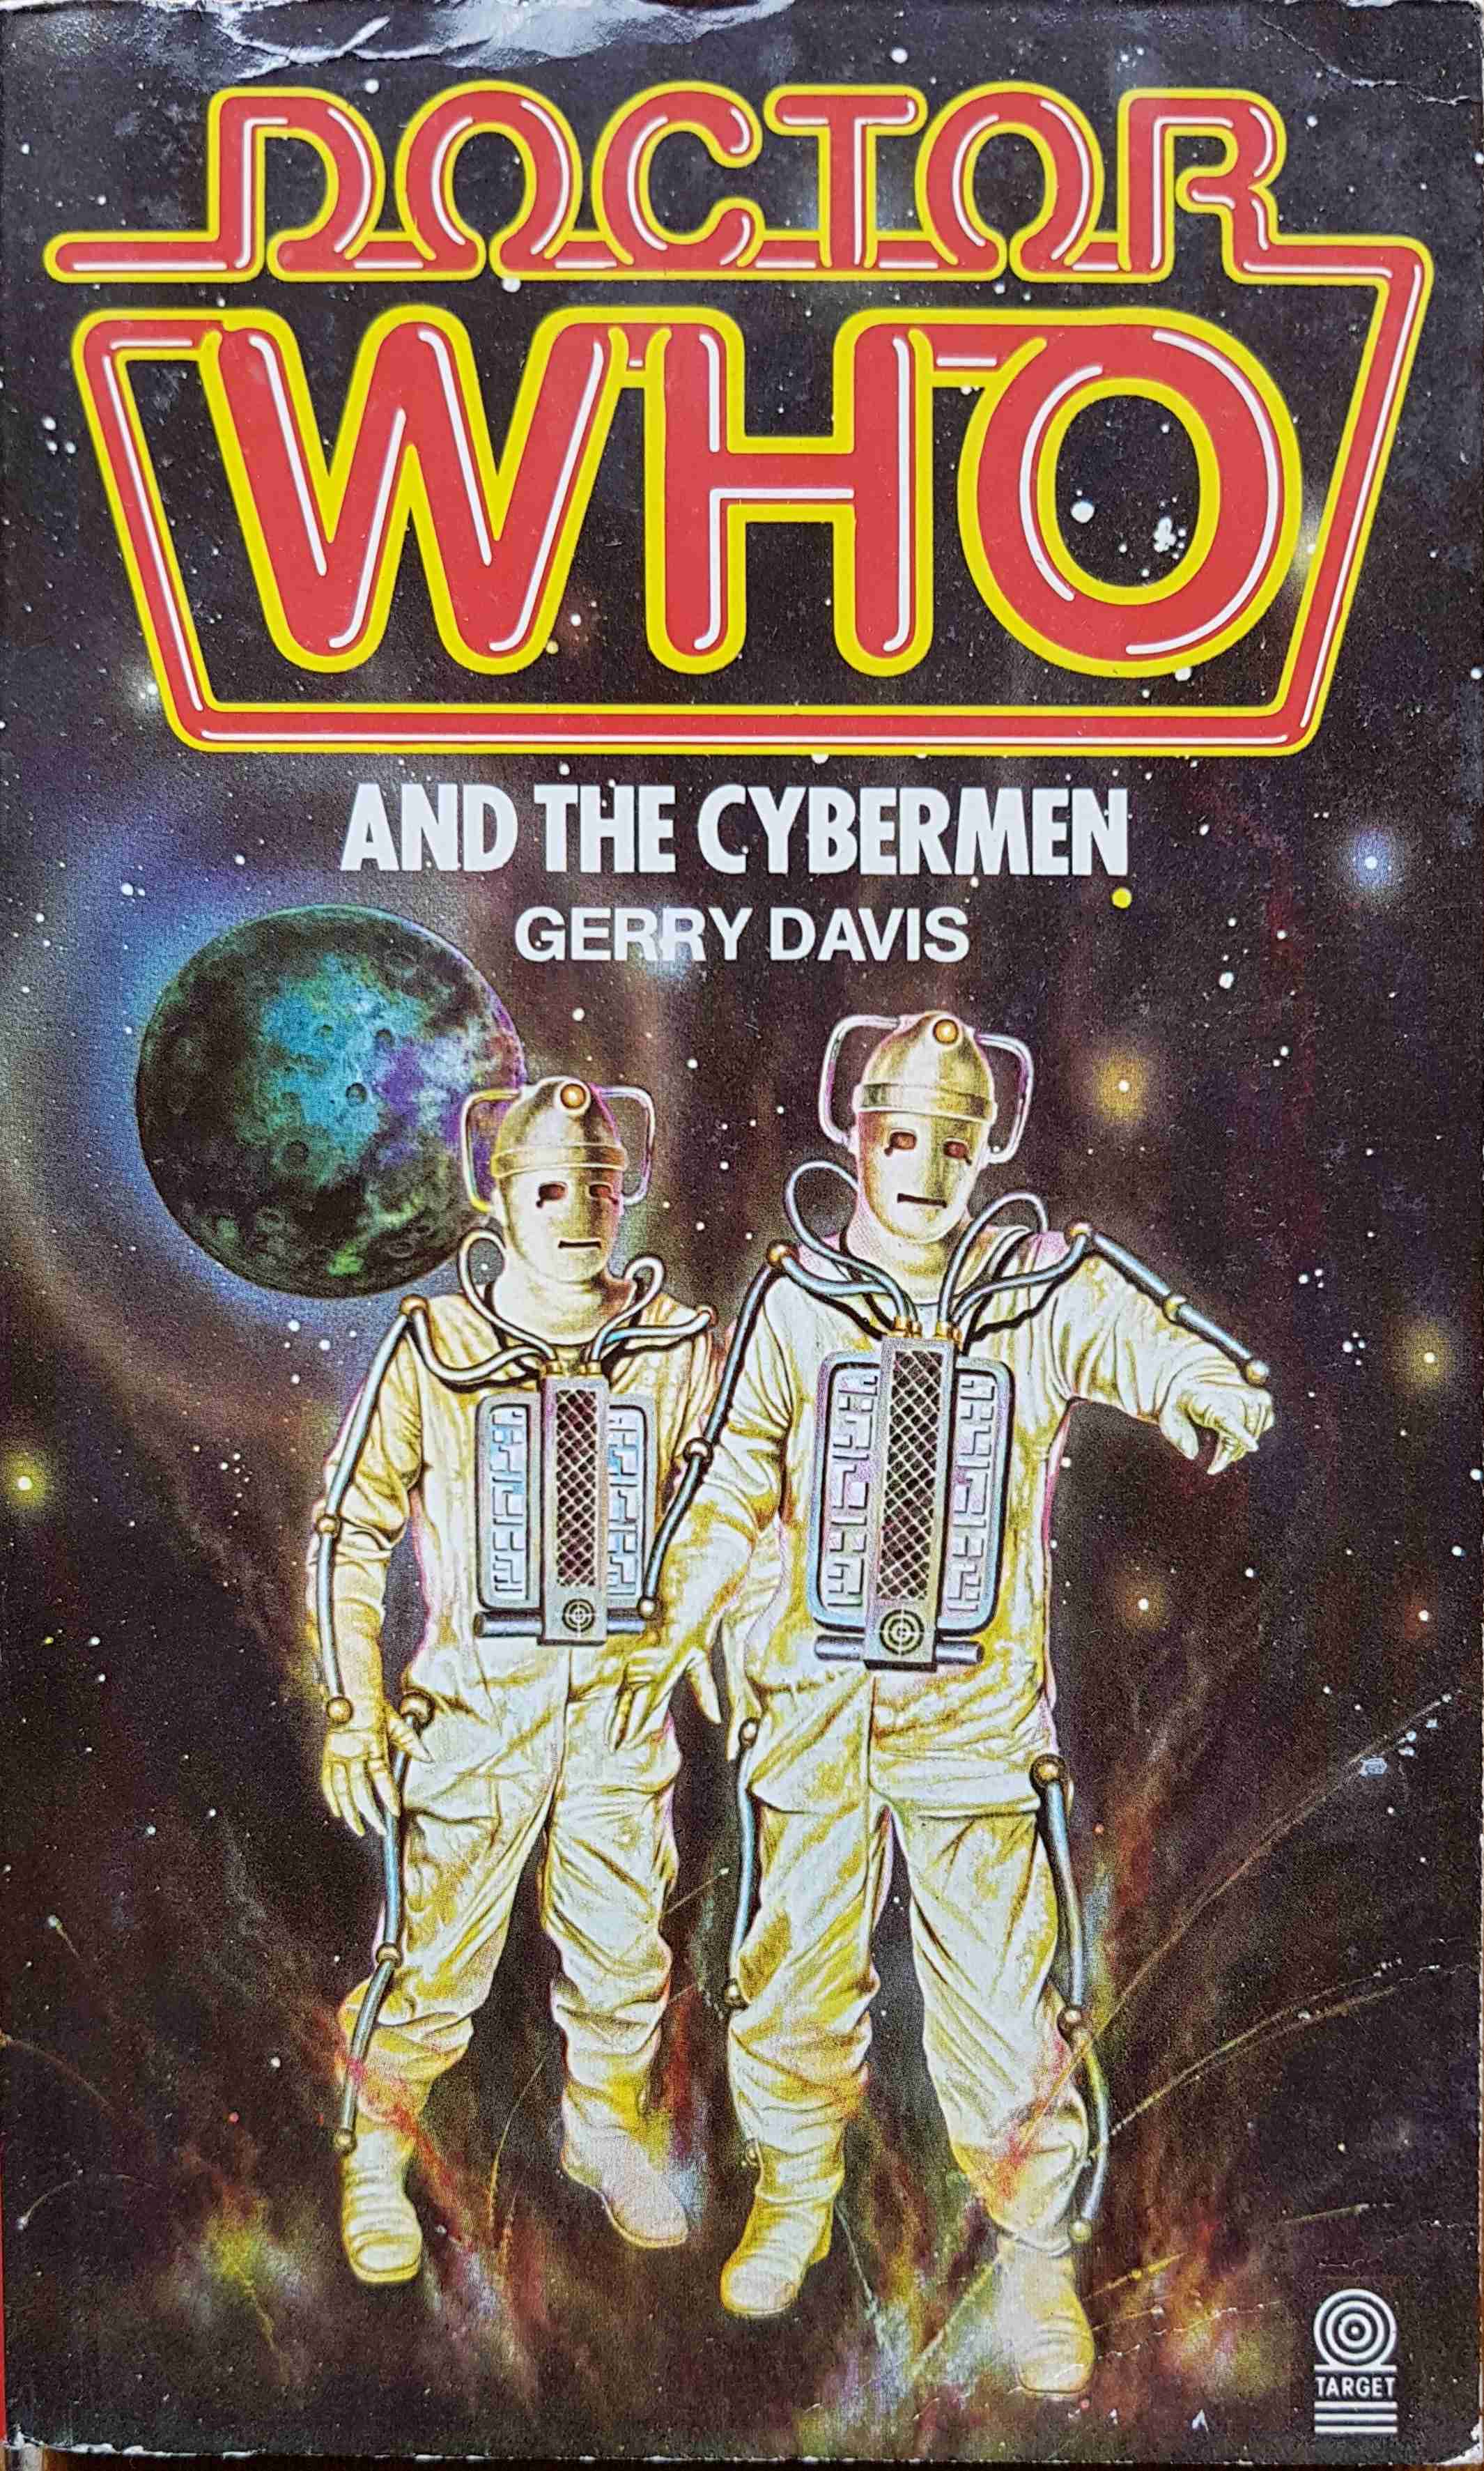 Picture of 0-426-11463-9 Doctor Who - The Cybermen by artist Gerry Davis from the BBC records and Tapes library